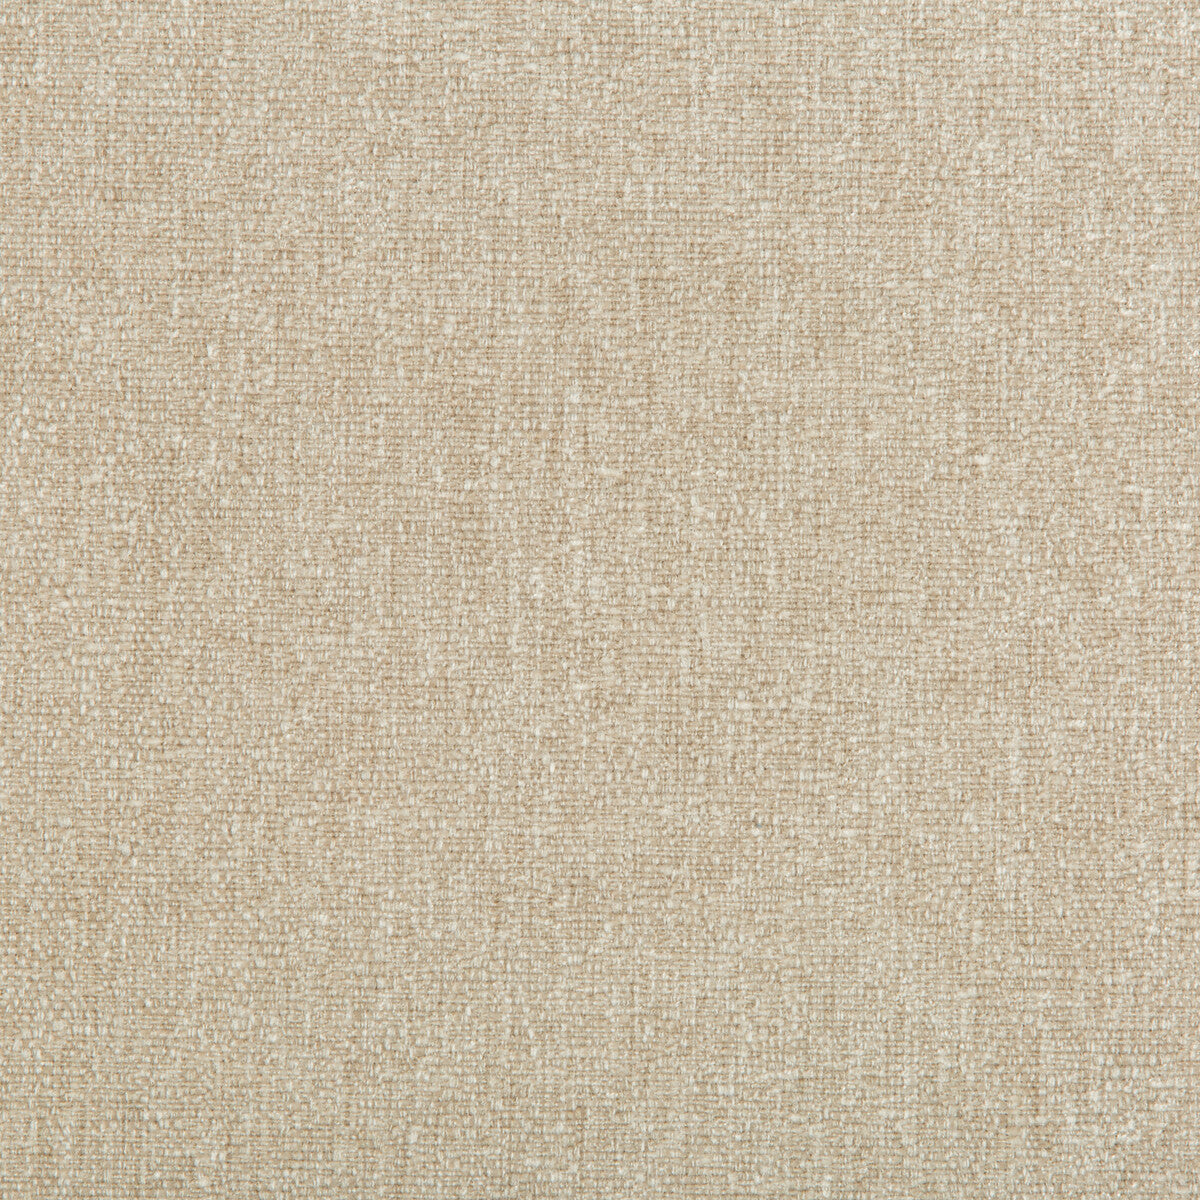 Kravet Smart fabric in 35391-16 color - pattern 35391.16.0 - by Kravet Smart in the Performance Crypton Home collection